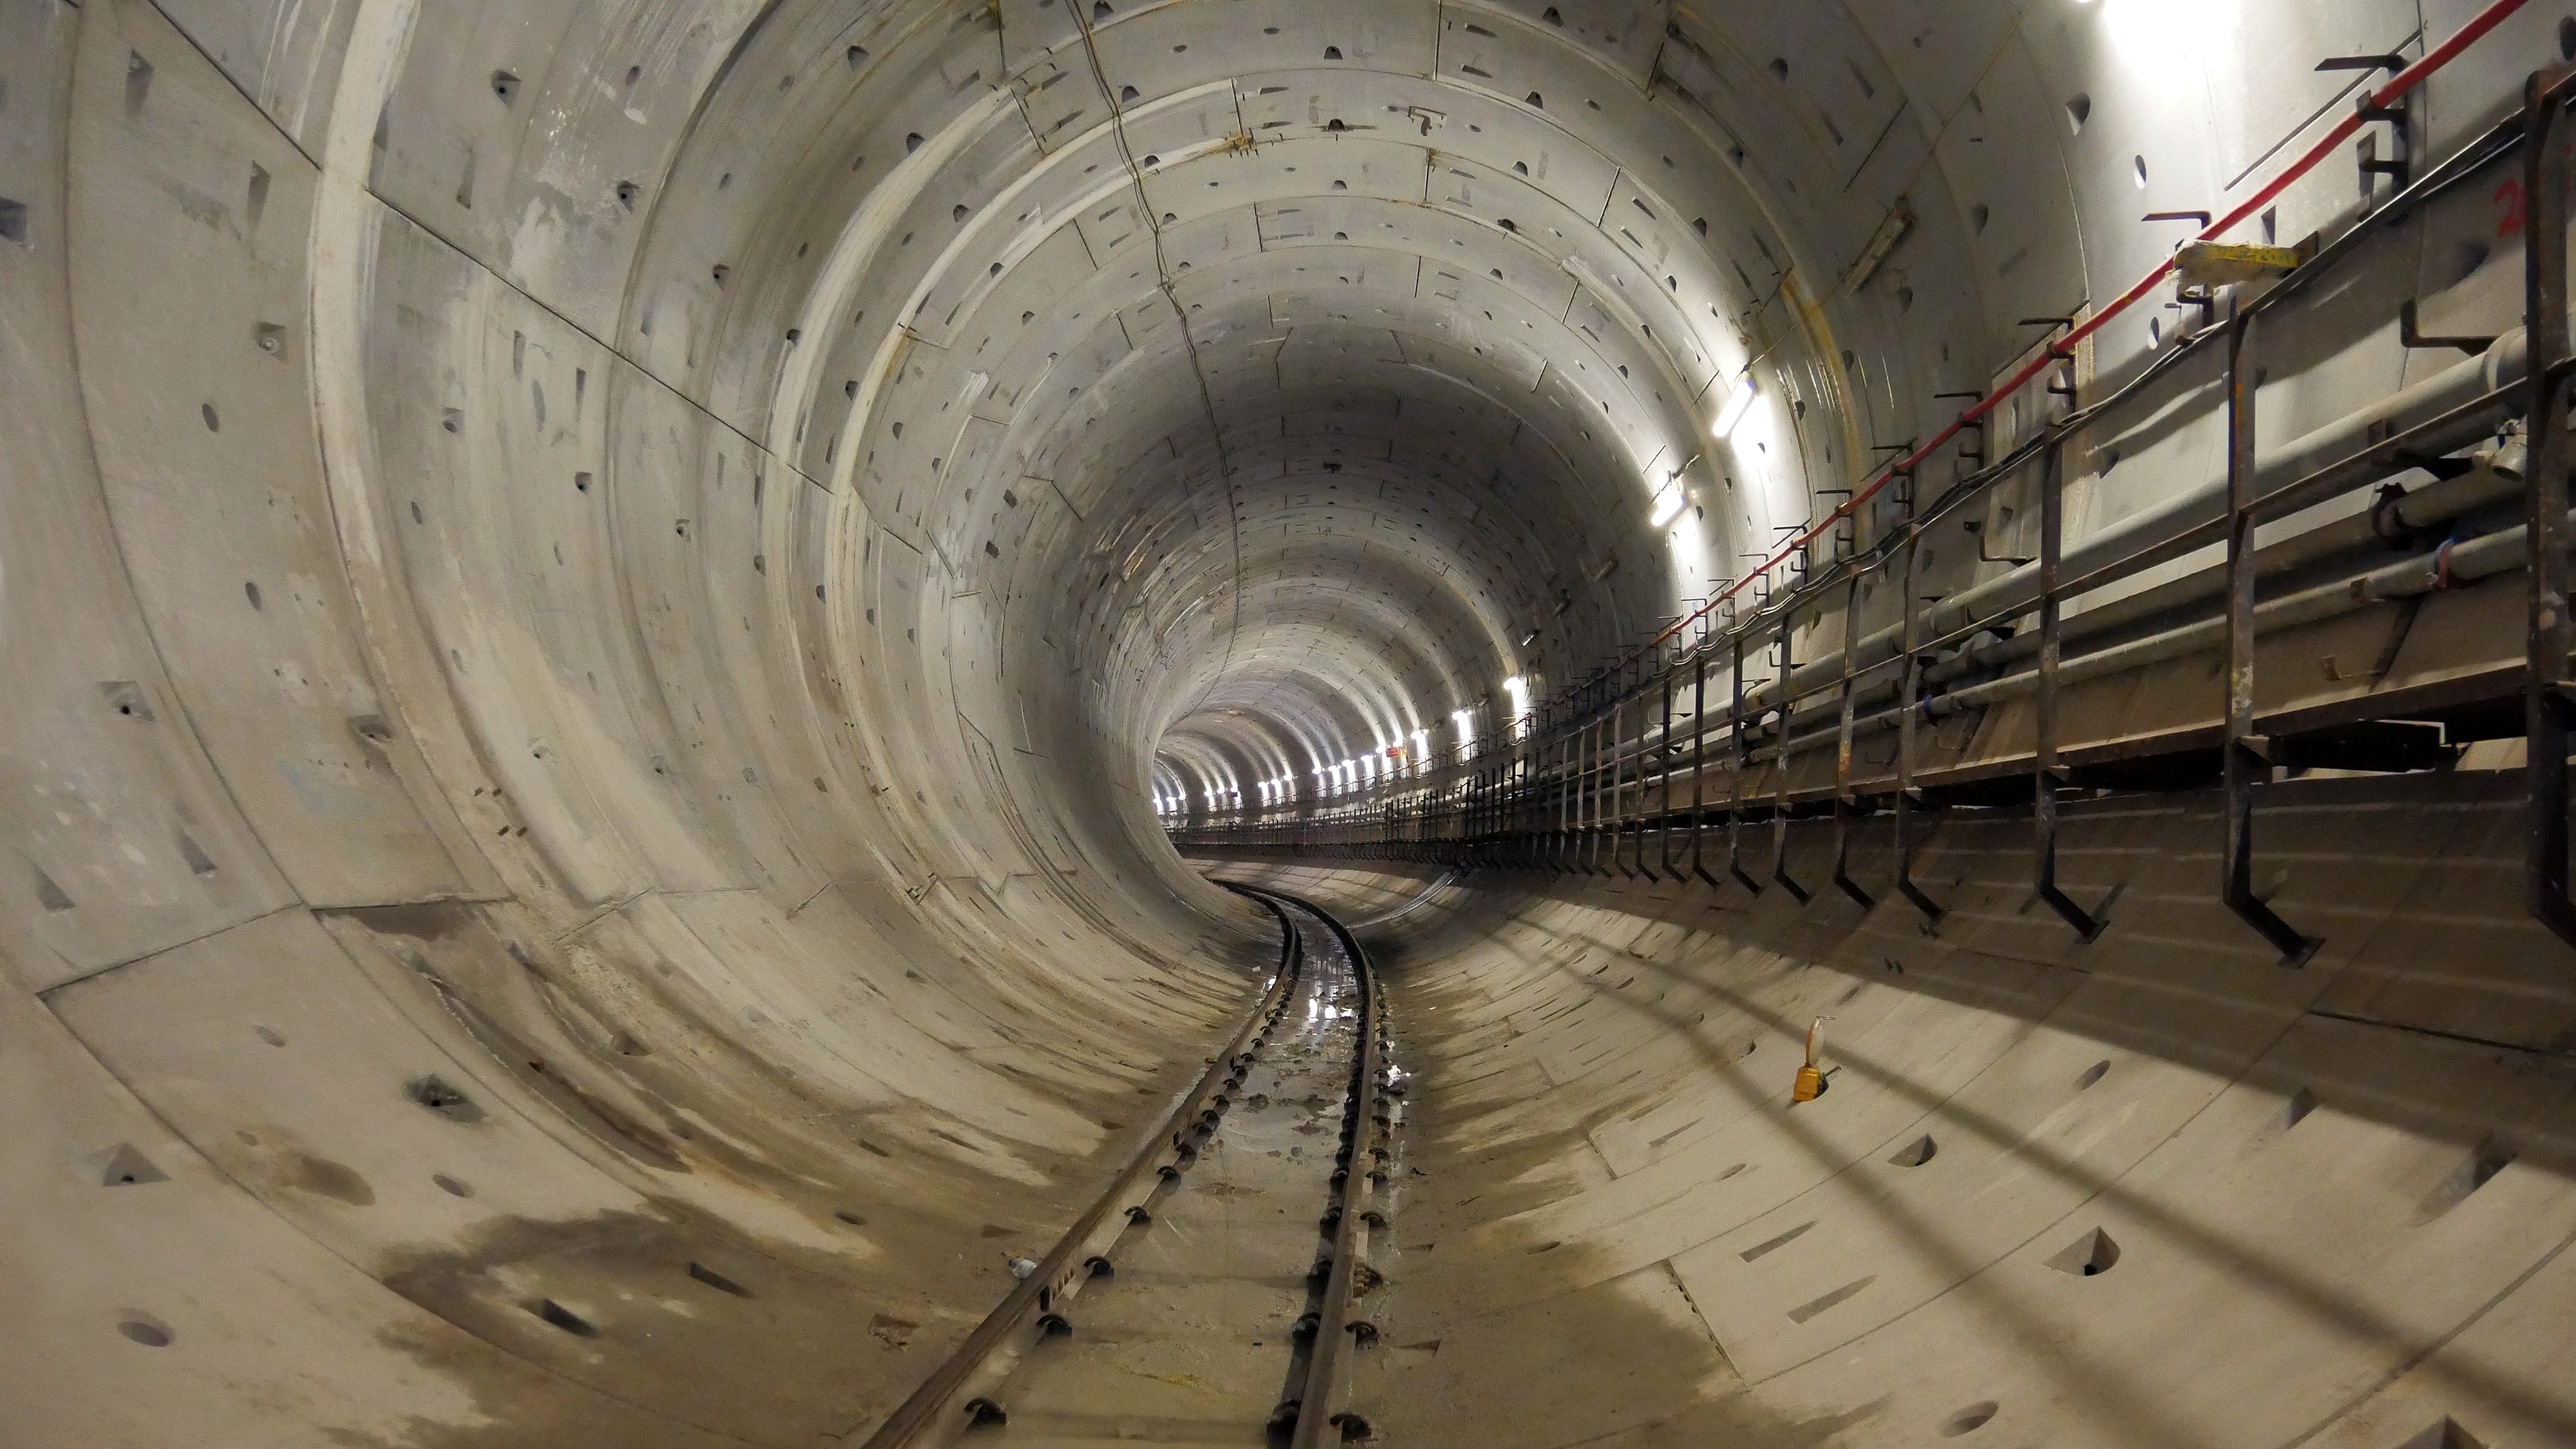 The Investment Delivery Forum cites the Thames Tideway Tunnel's financial model as a success story, paving the way for potential replication and increased insurer investments across various sectors 

Image Source: Jacobs 